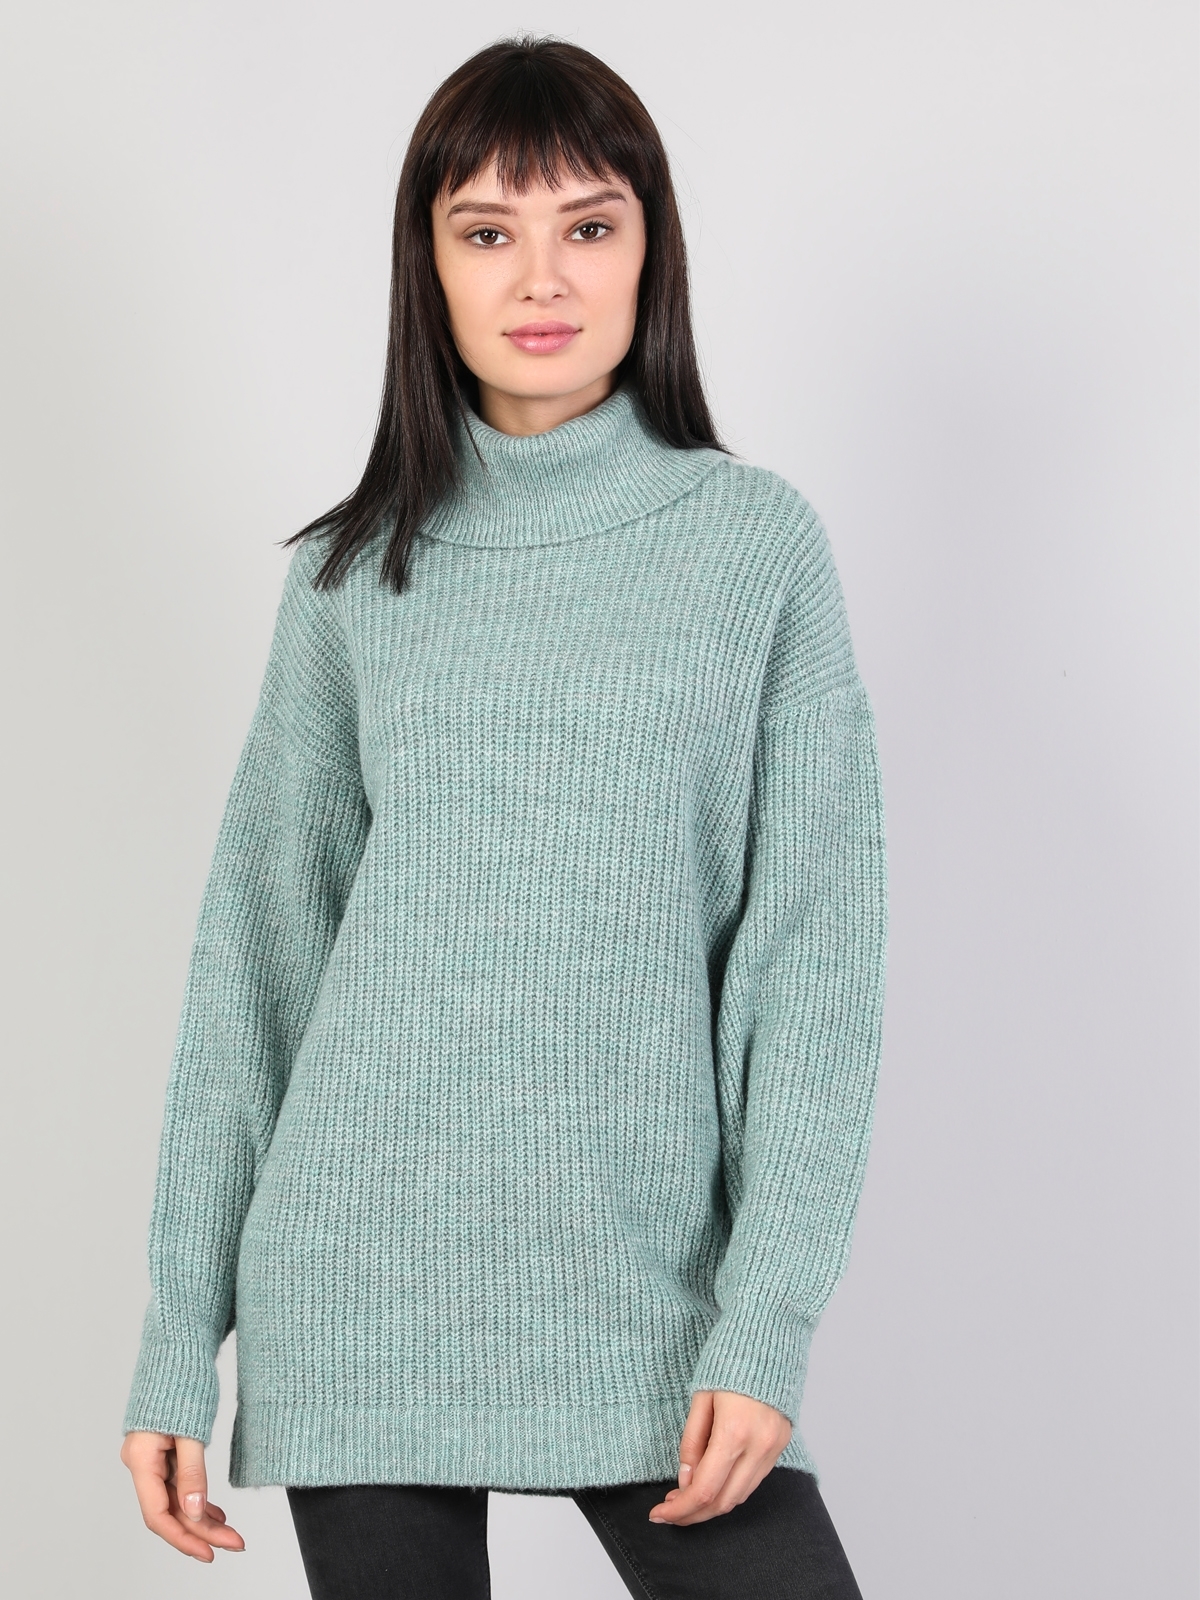 Colins Turquıse Woman Sweaters. 2